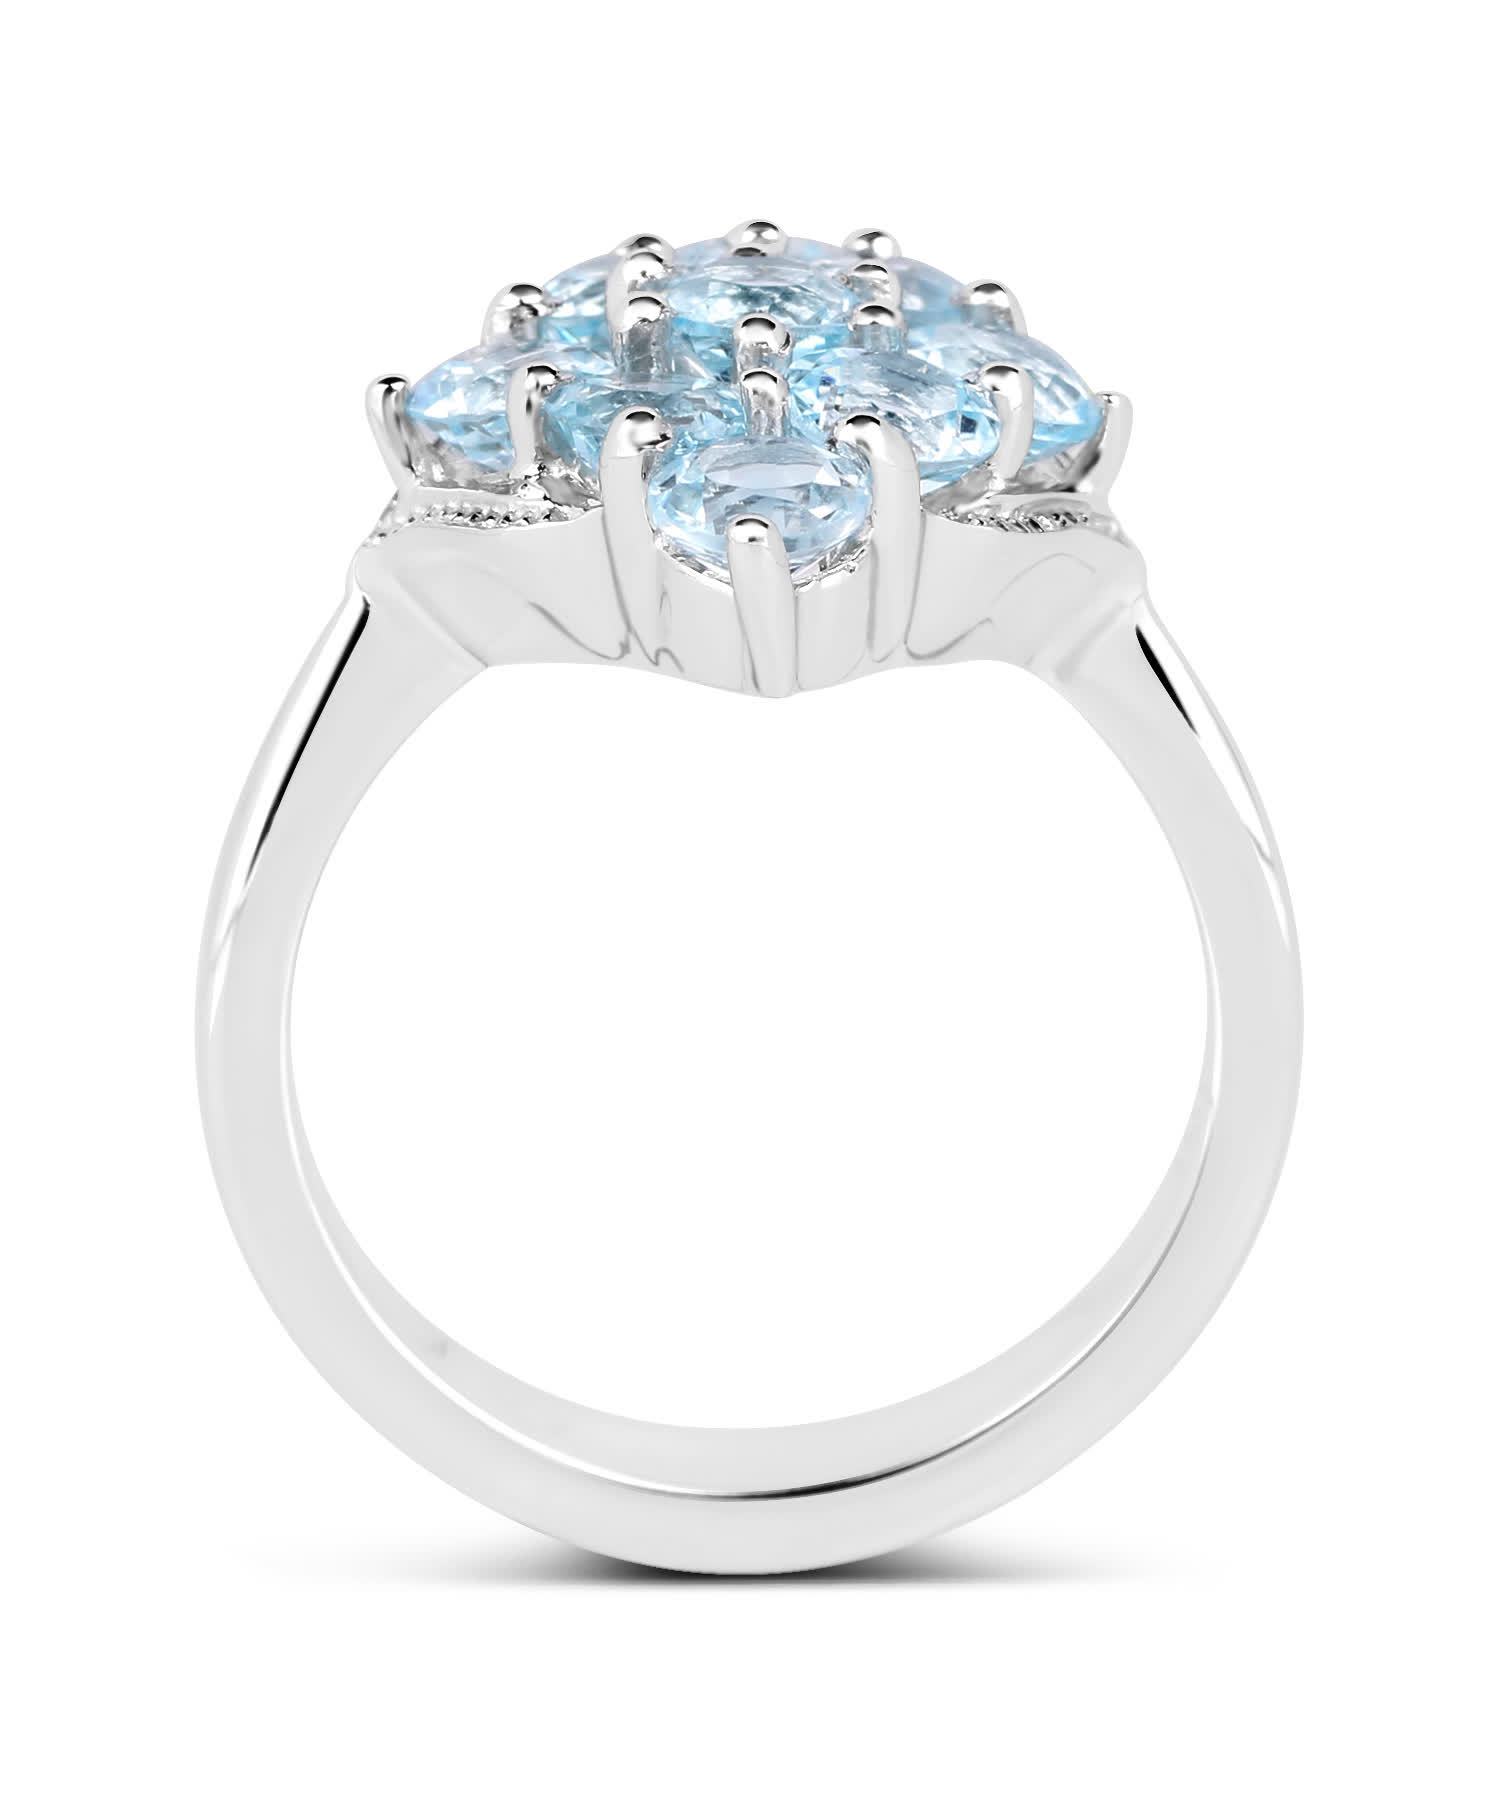 2.88ctw Natural Sky Blue Topaz Rhodium Plated 925 Sterling Silver Right Hand Ring View 2